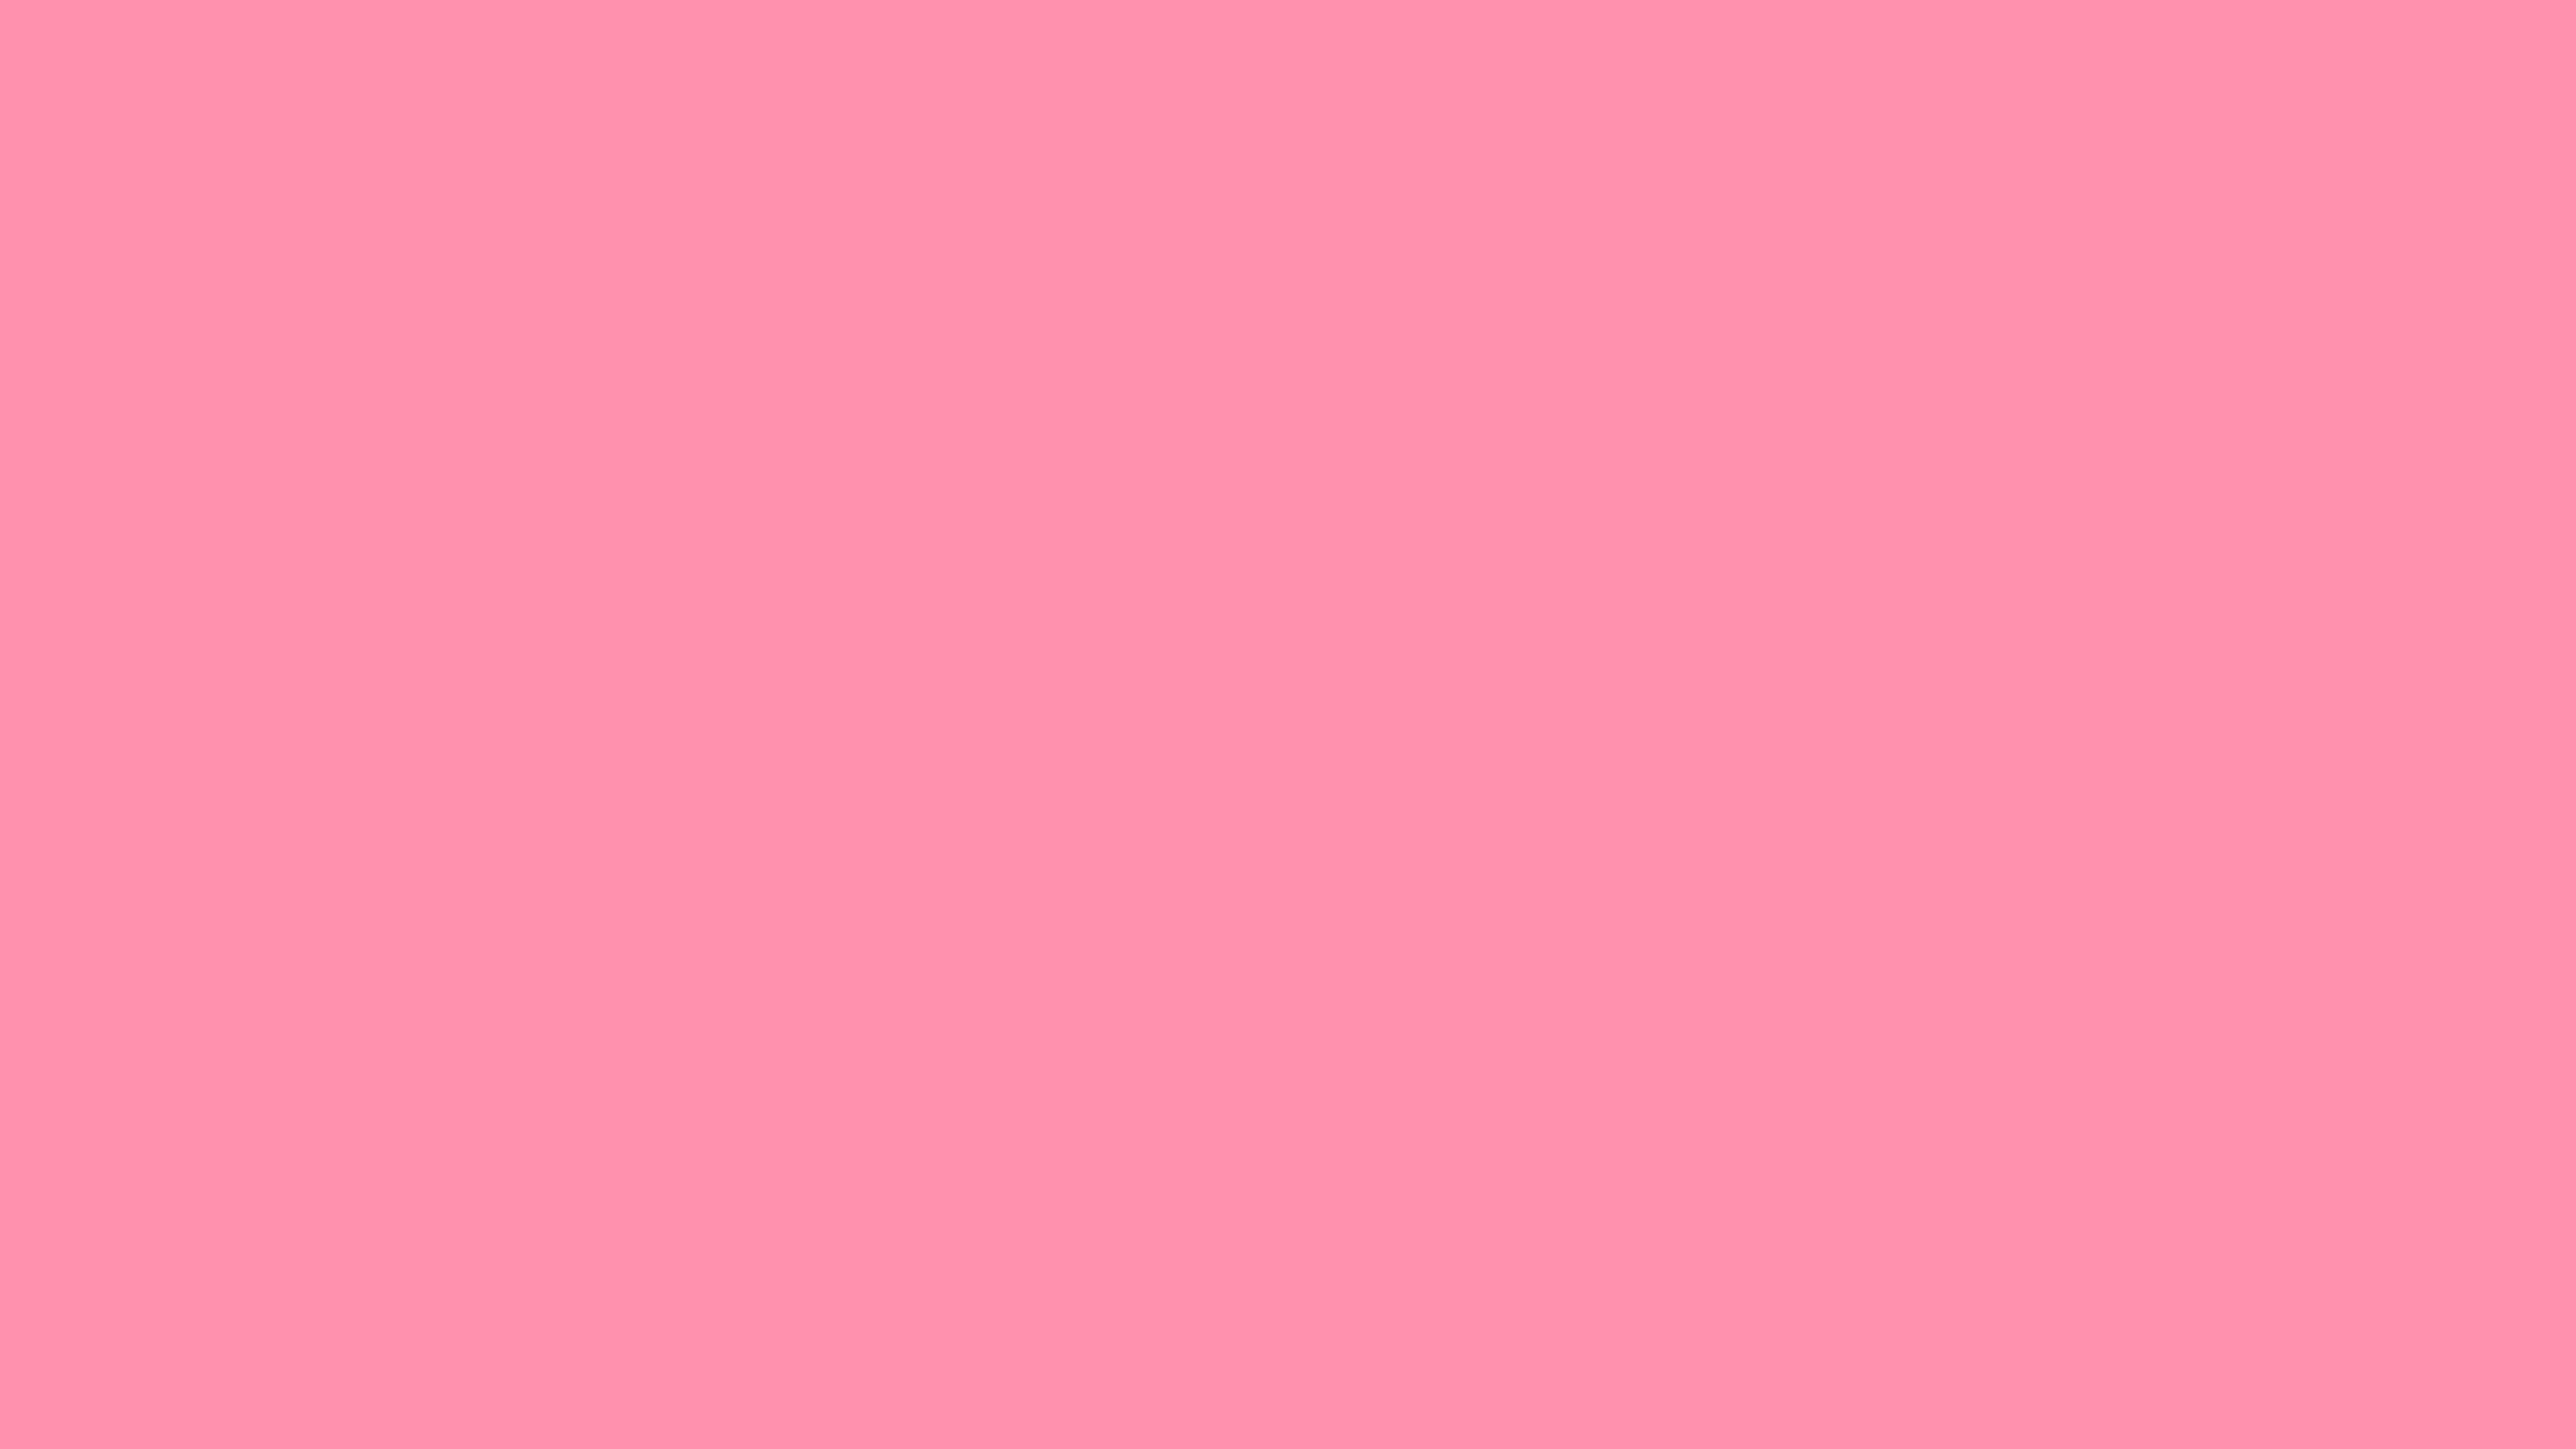 4096x2304 Schauss Pink Solid Color Background